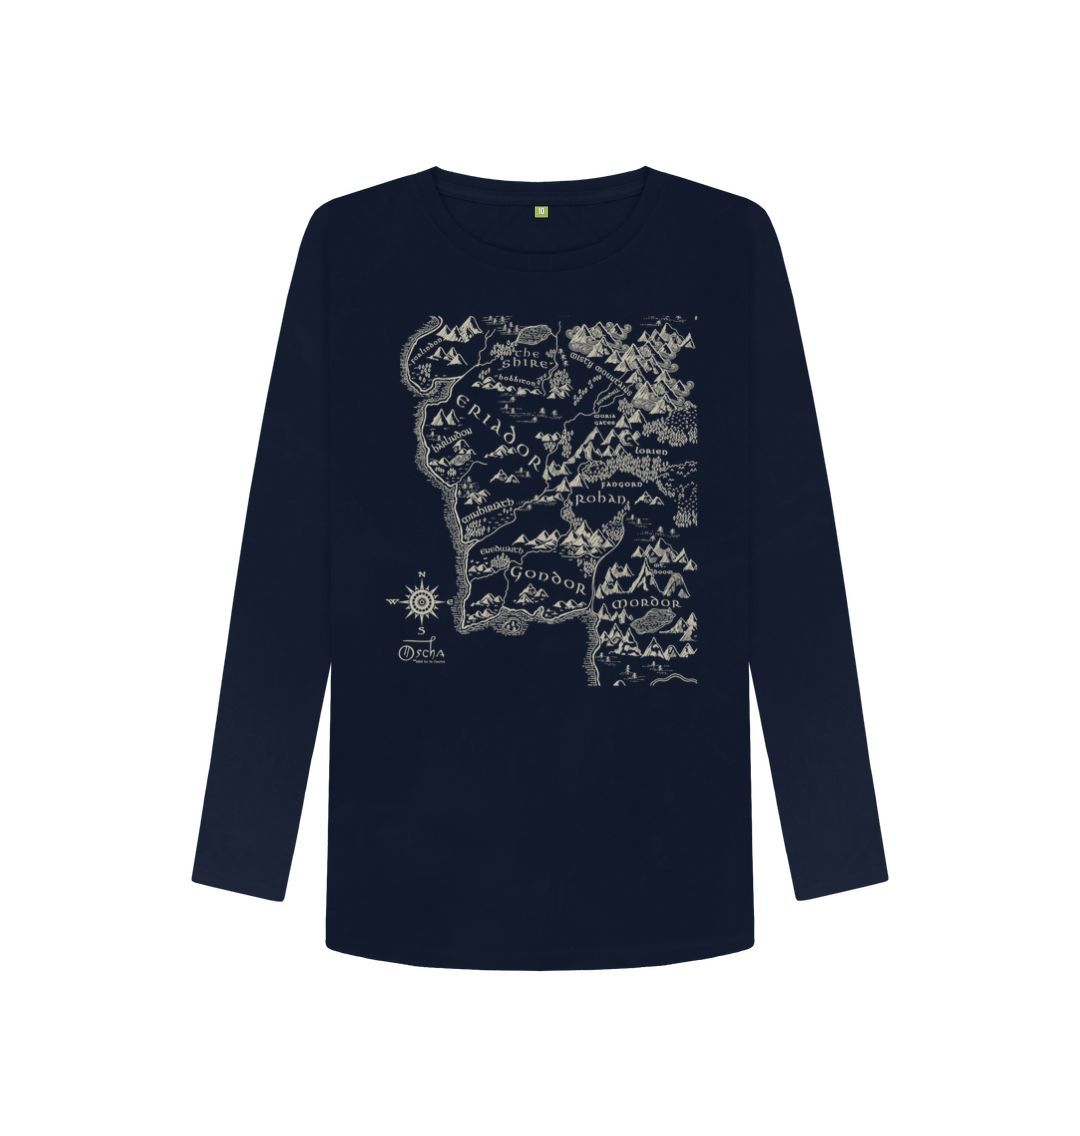 Navy Blue Realm of MIDDLE-EARTH\u2122 Women's Long Sleeved T-Shirt